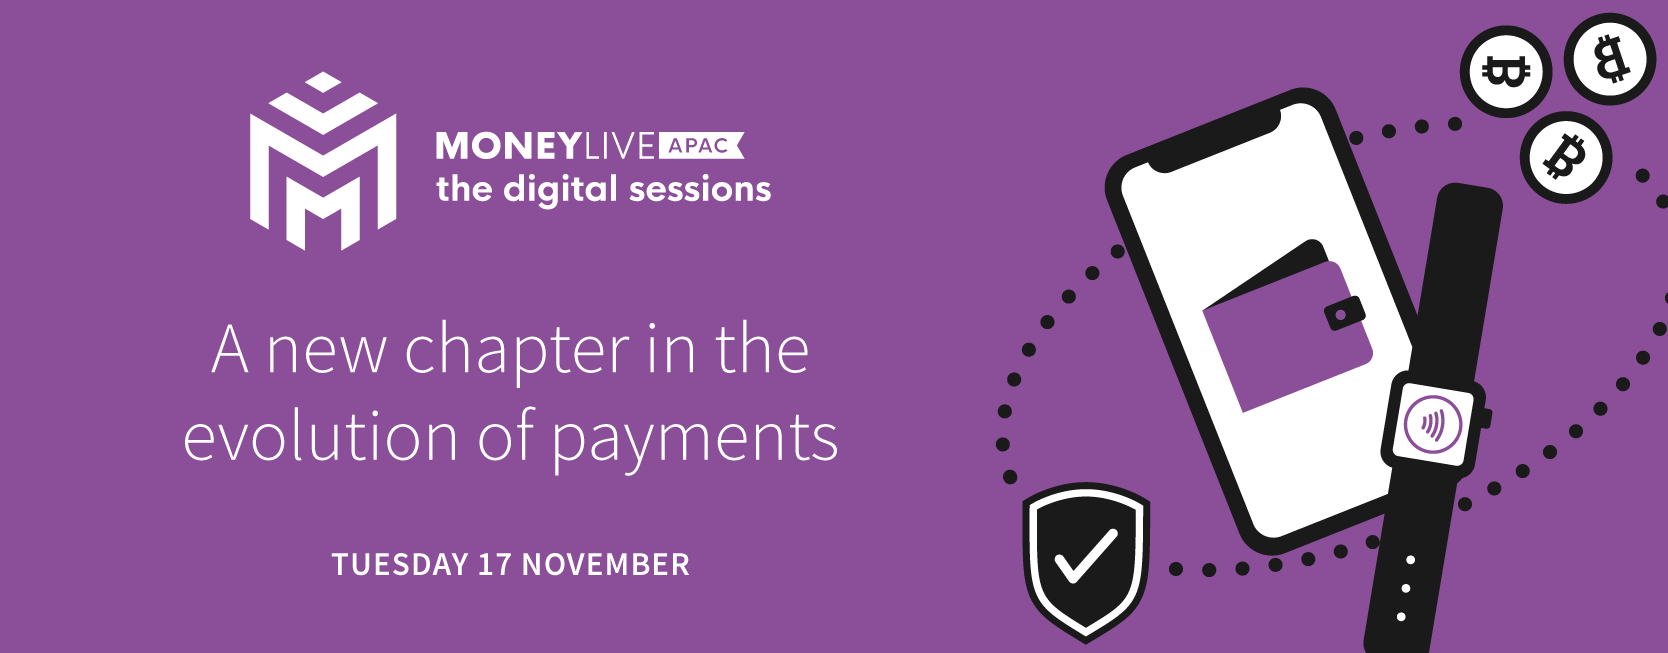 MoneyLIVE APAC The Digital Sessions